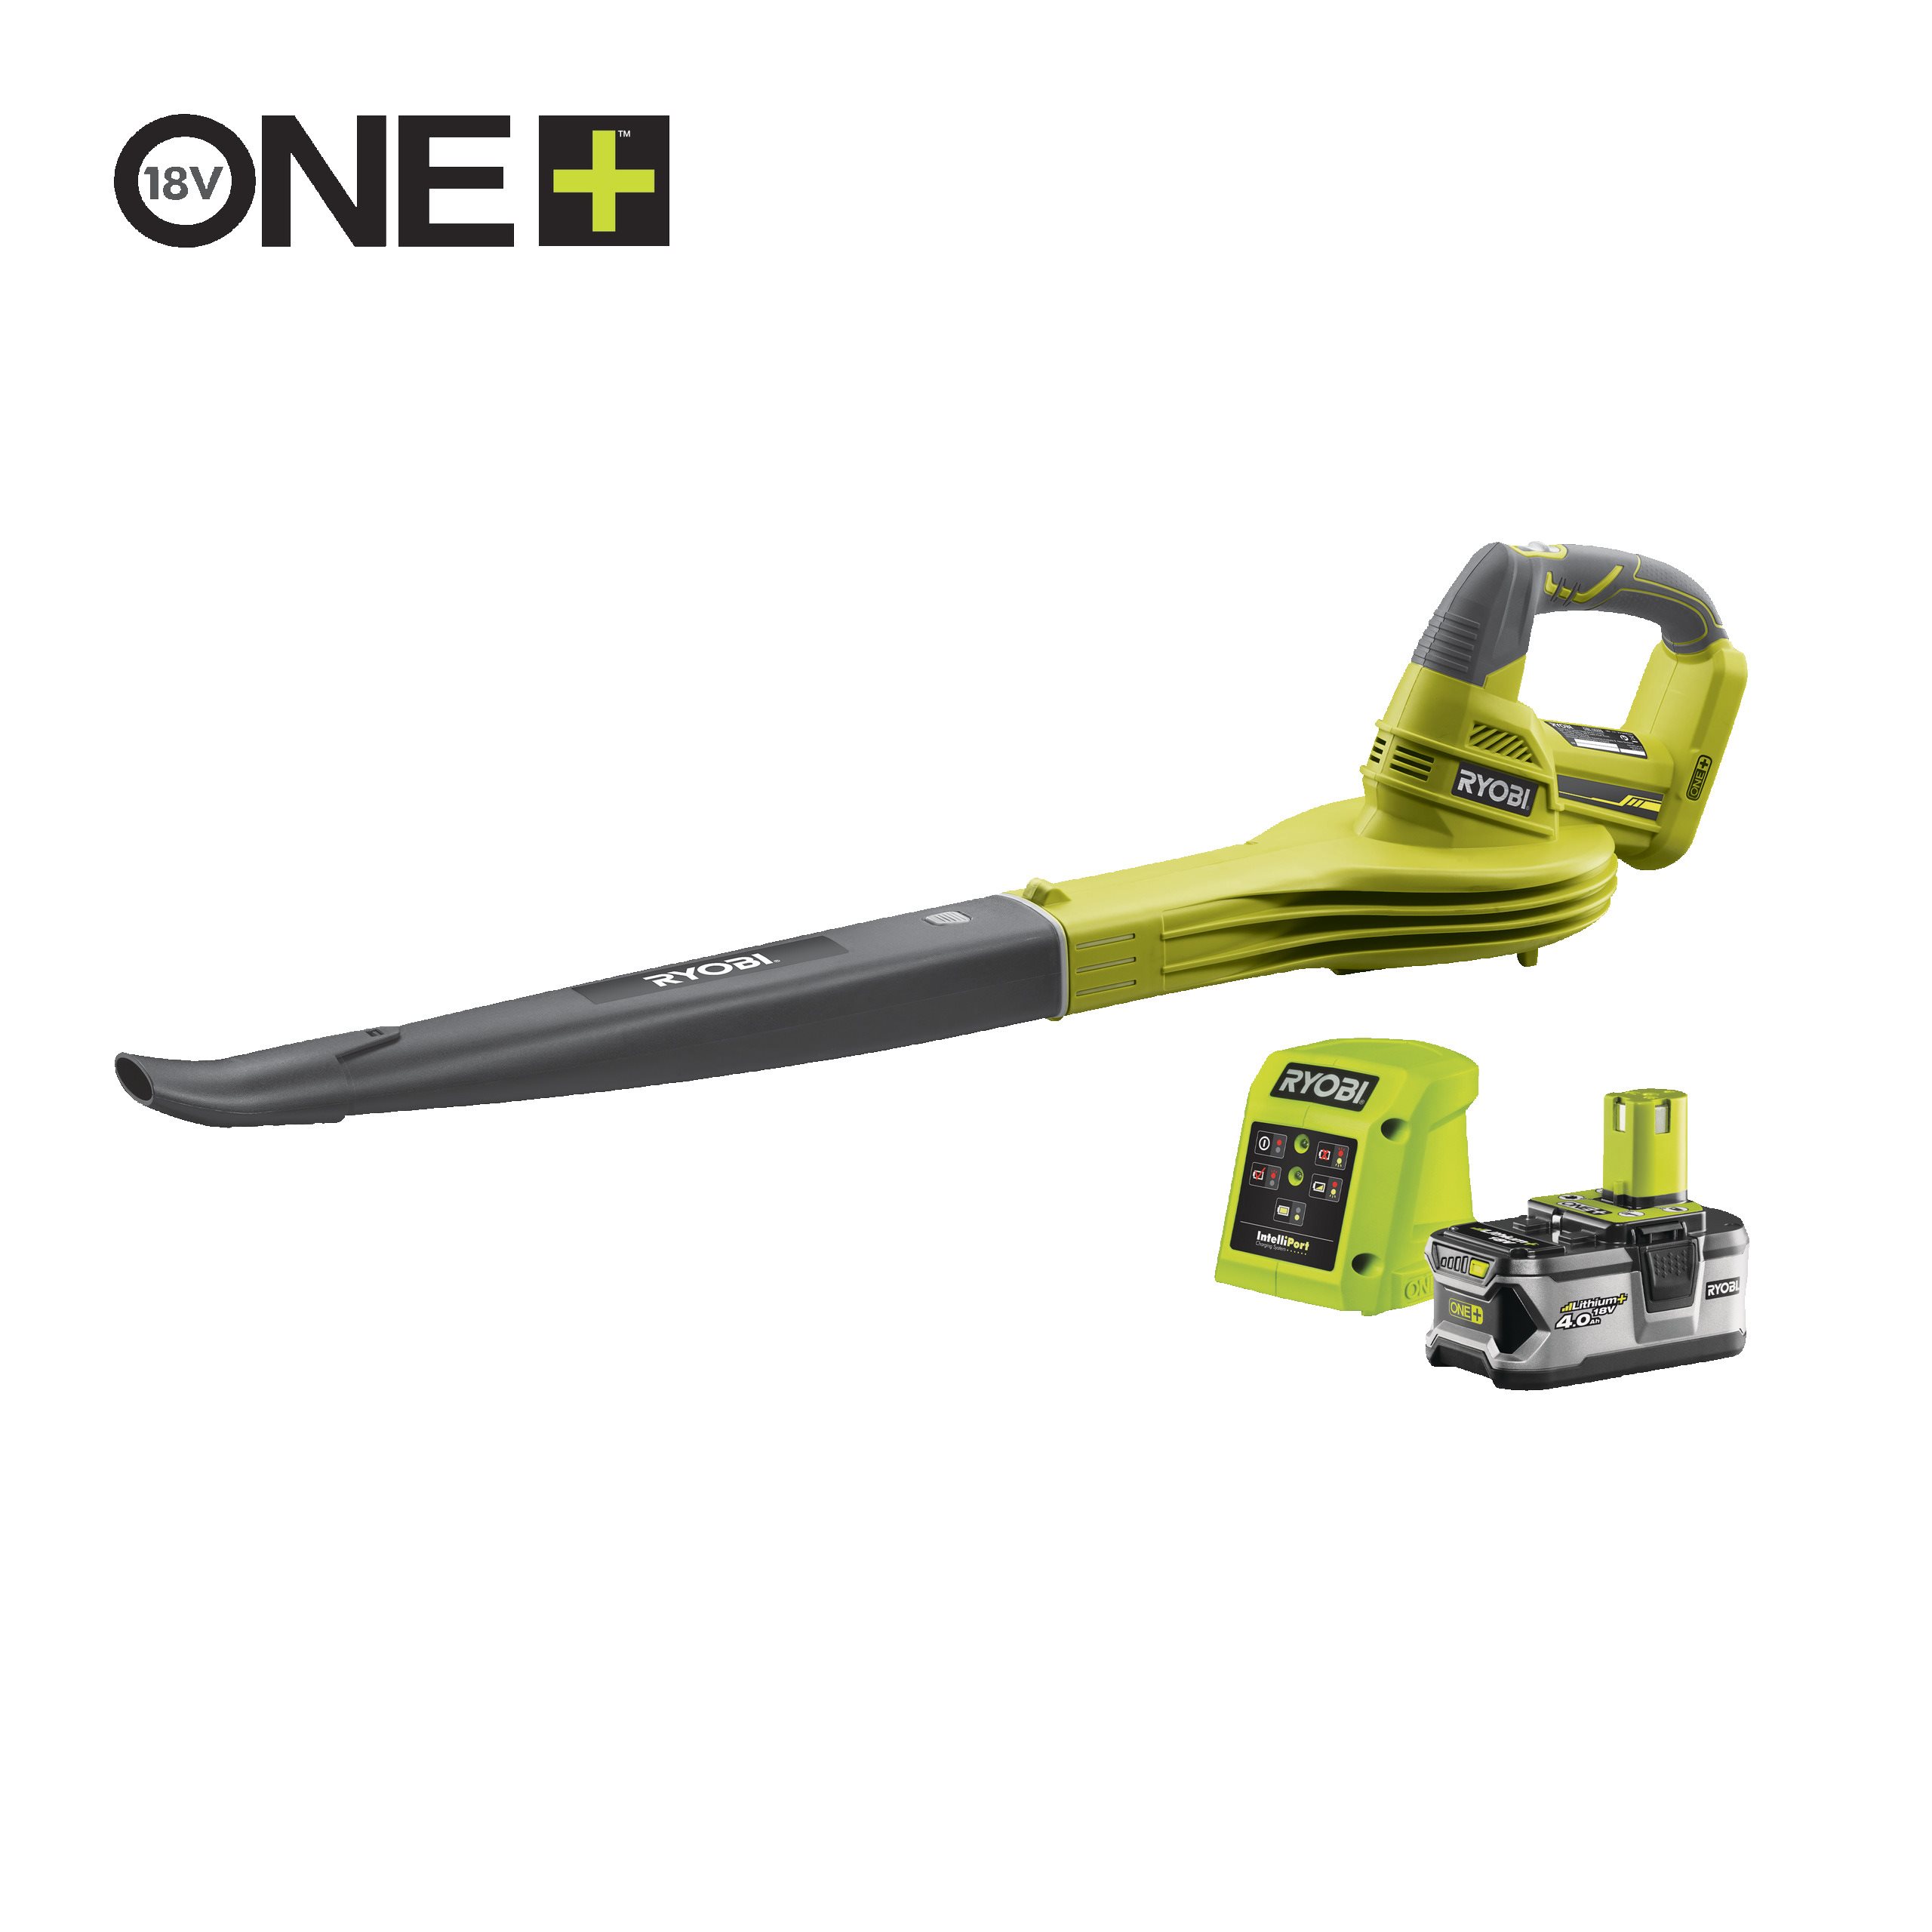 Ryobi 18V 5.0AH One Cordless Blower Kit-Battery and Charger 245km Air Velocity